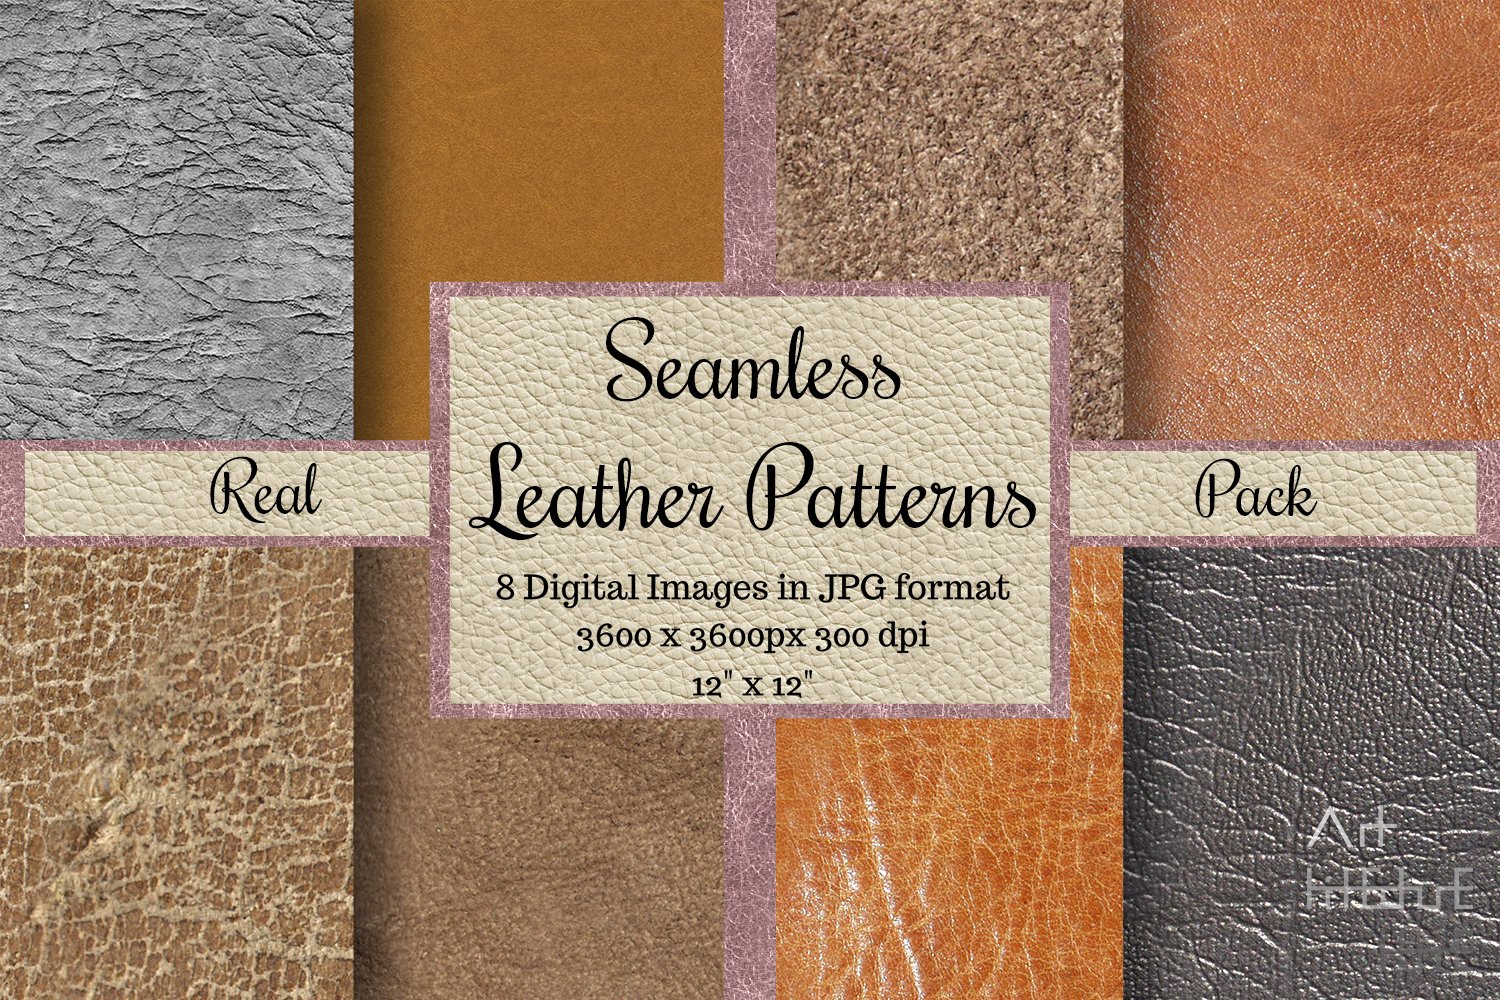 Seamless Leather Patterns Real Pack cover image.